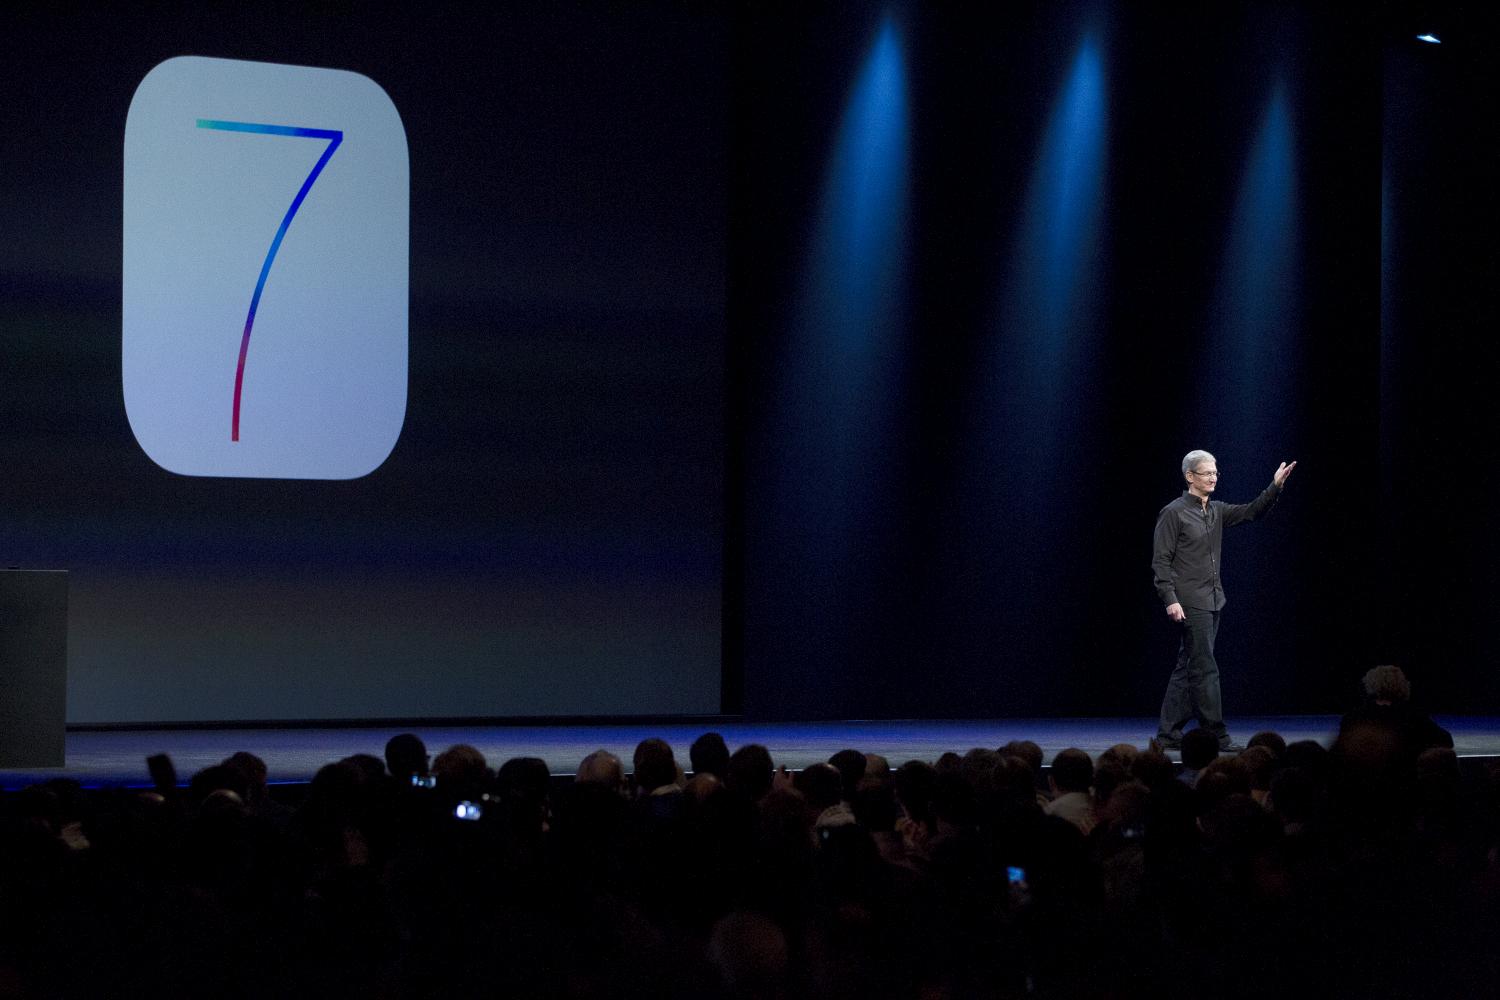 Apple CEO Tim Cook introduces iOS 7 at a keynote address during the 2013 Apple Worldwide Developers Conference at the Moscone Center on June 10, 2013 in San Francisco, California. (Kimberly White--Getty Images)